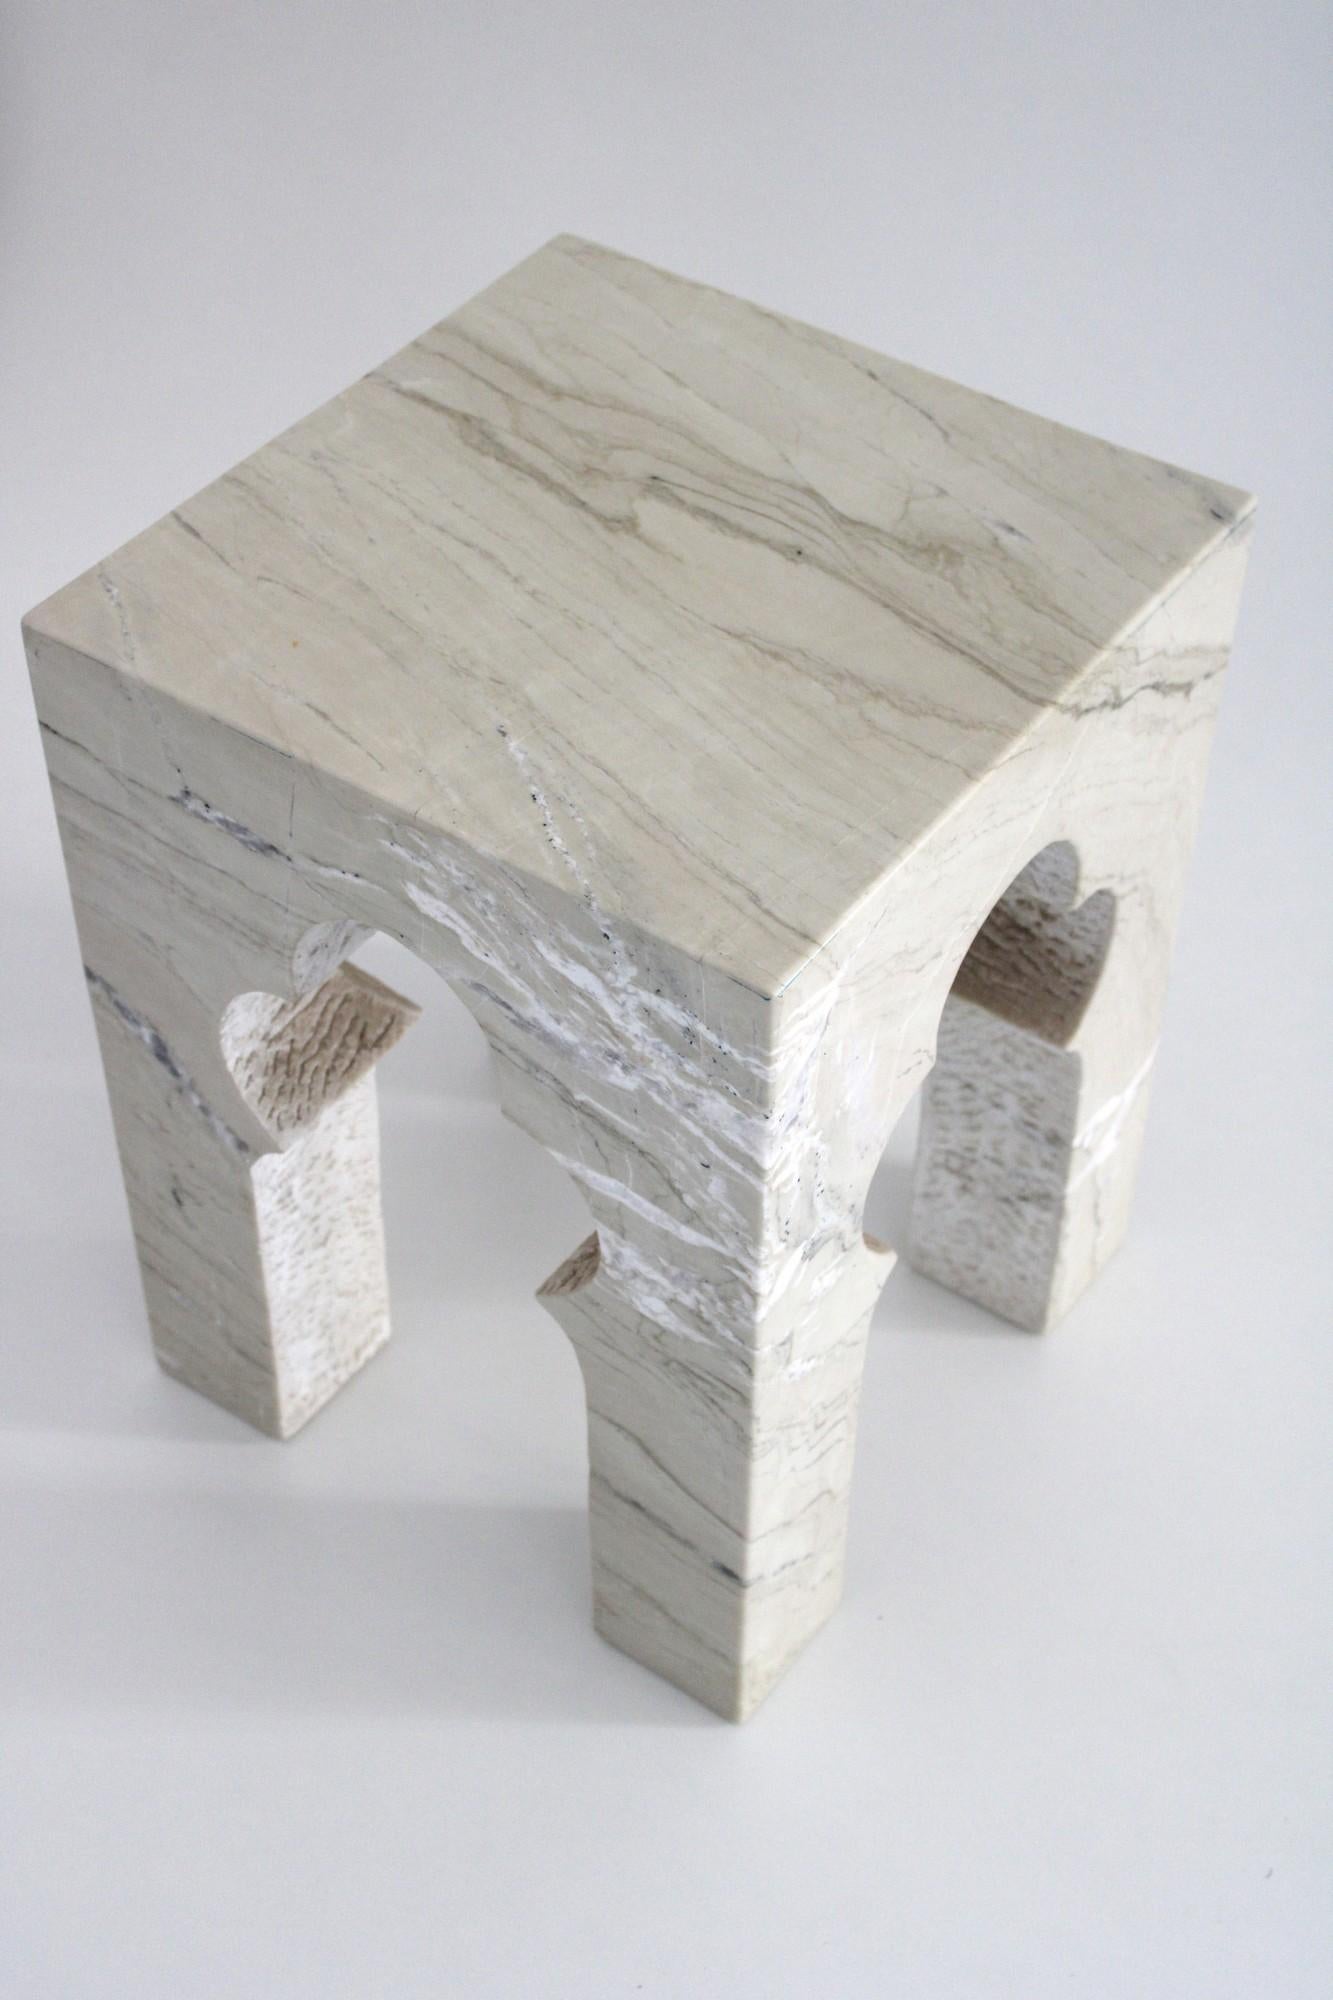 Inspired by the elegant architectural element, namely the mehrabs, he saw in the palaces of Mughal India, the renowned designer Paul Mathieu has created this unique hand carved side table. Solid blocks of marble are hand carved into low elegant